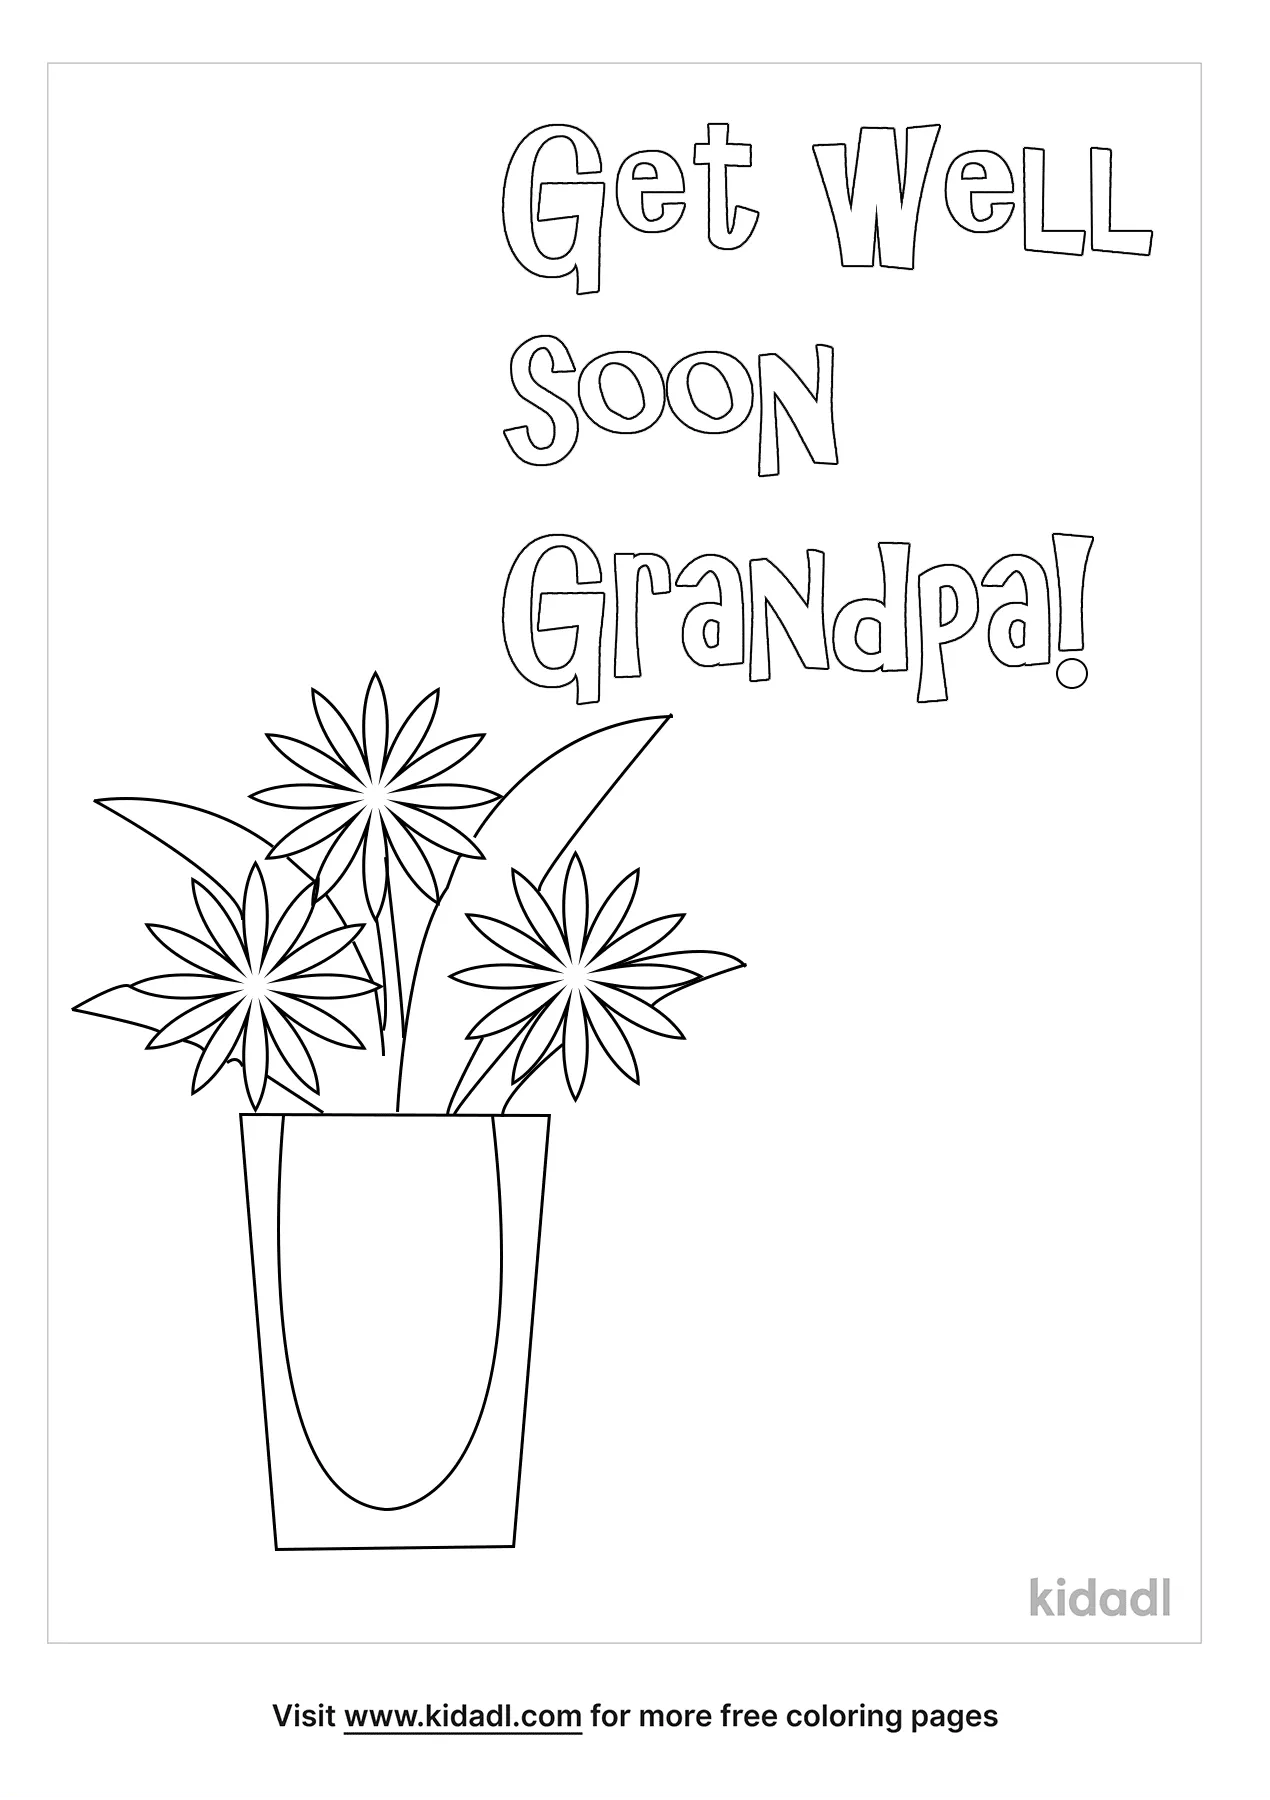 Get Well Soon Grandpa Coloring Page